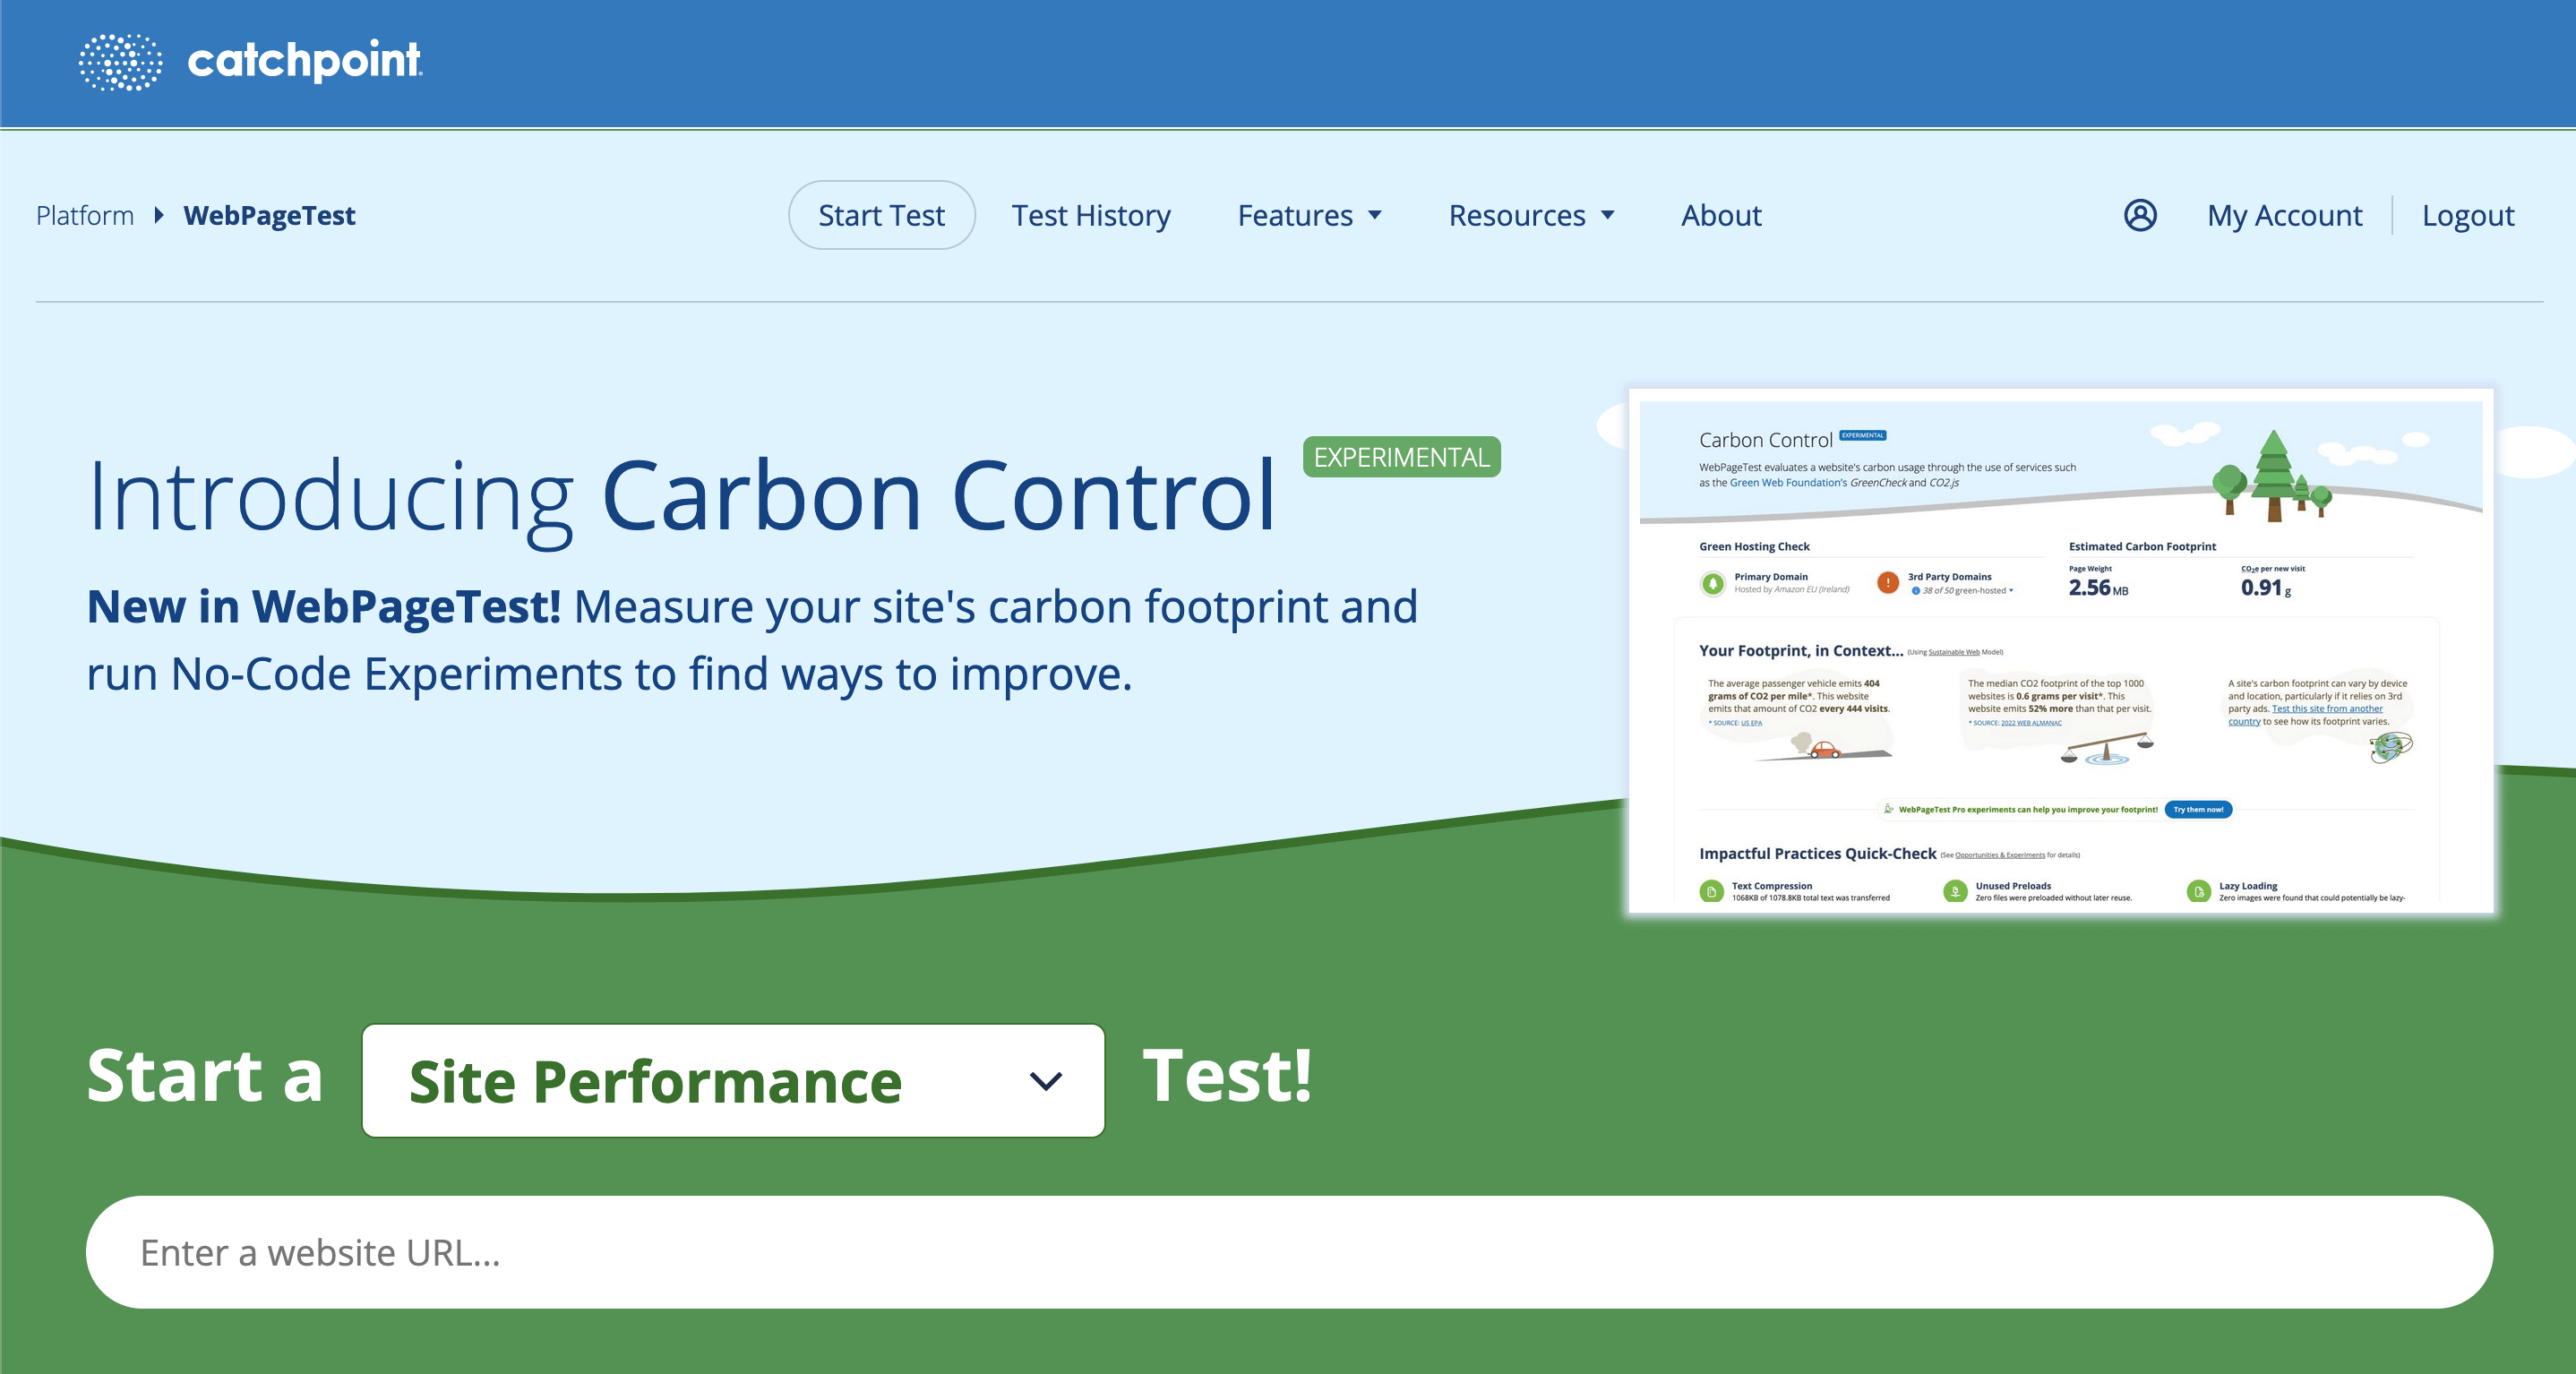 A screenshot of part of WebPageTest's home page showing the experimental Carbon Control feature with the text Introducing Carbon Control, New in WebPageTest - Measure your site's carbon footprint and run No-Code Experiments to find ways to improve